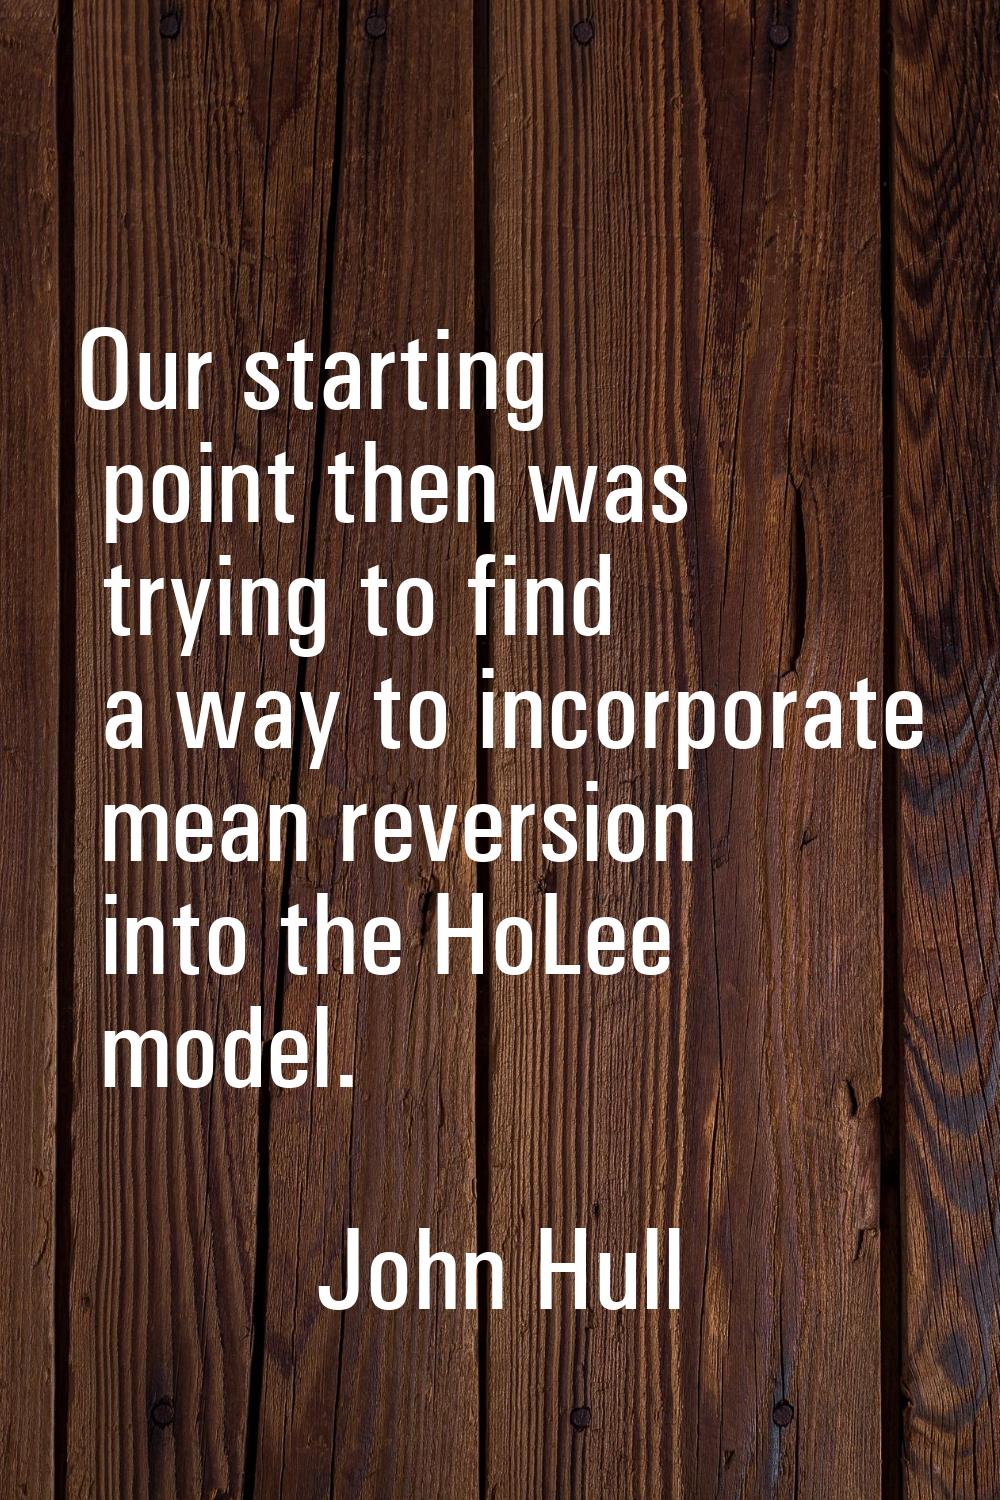 Our starting point then was trying to find a way to incorporate mean reversion into the HoLee model